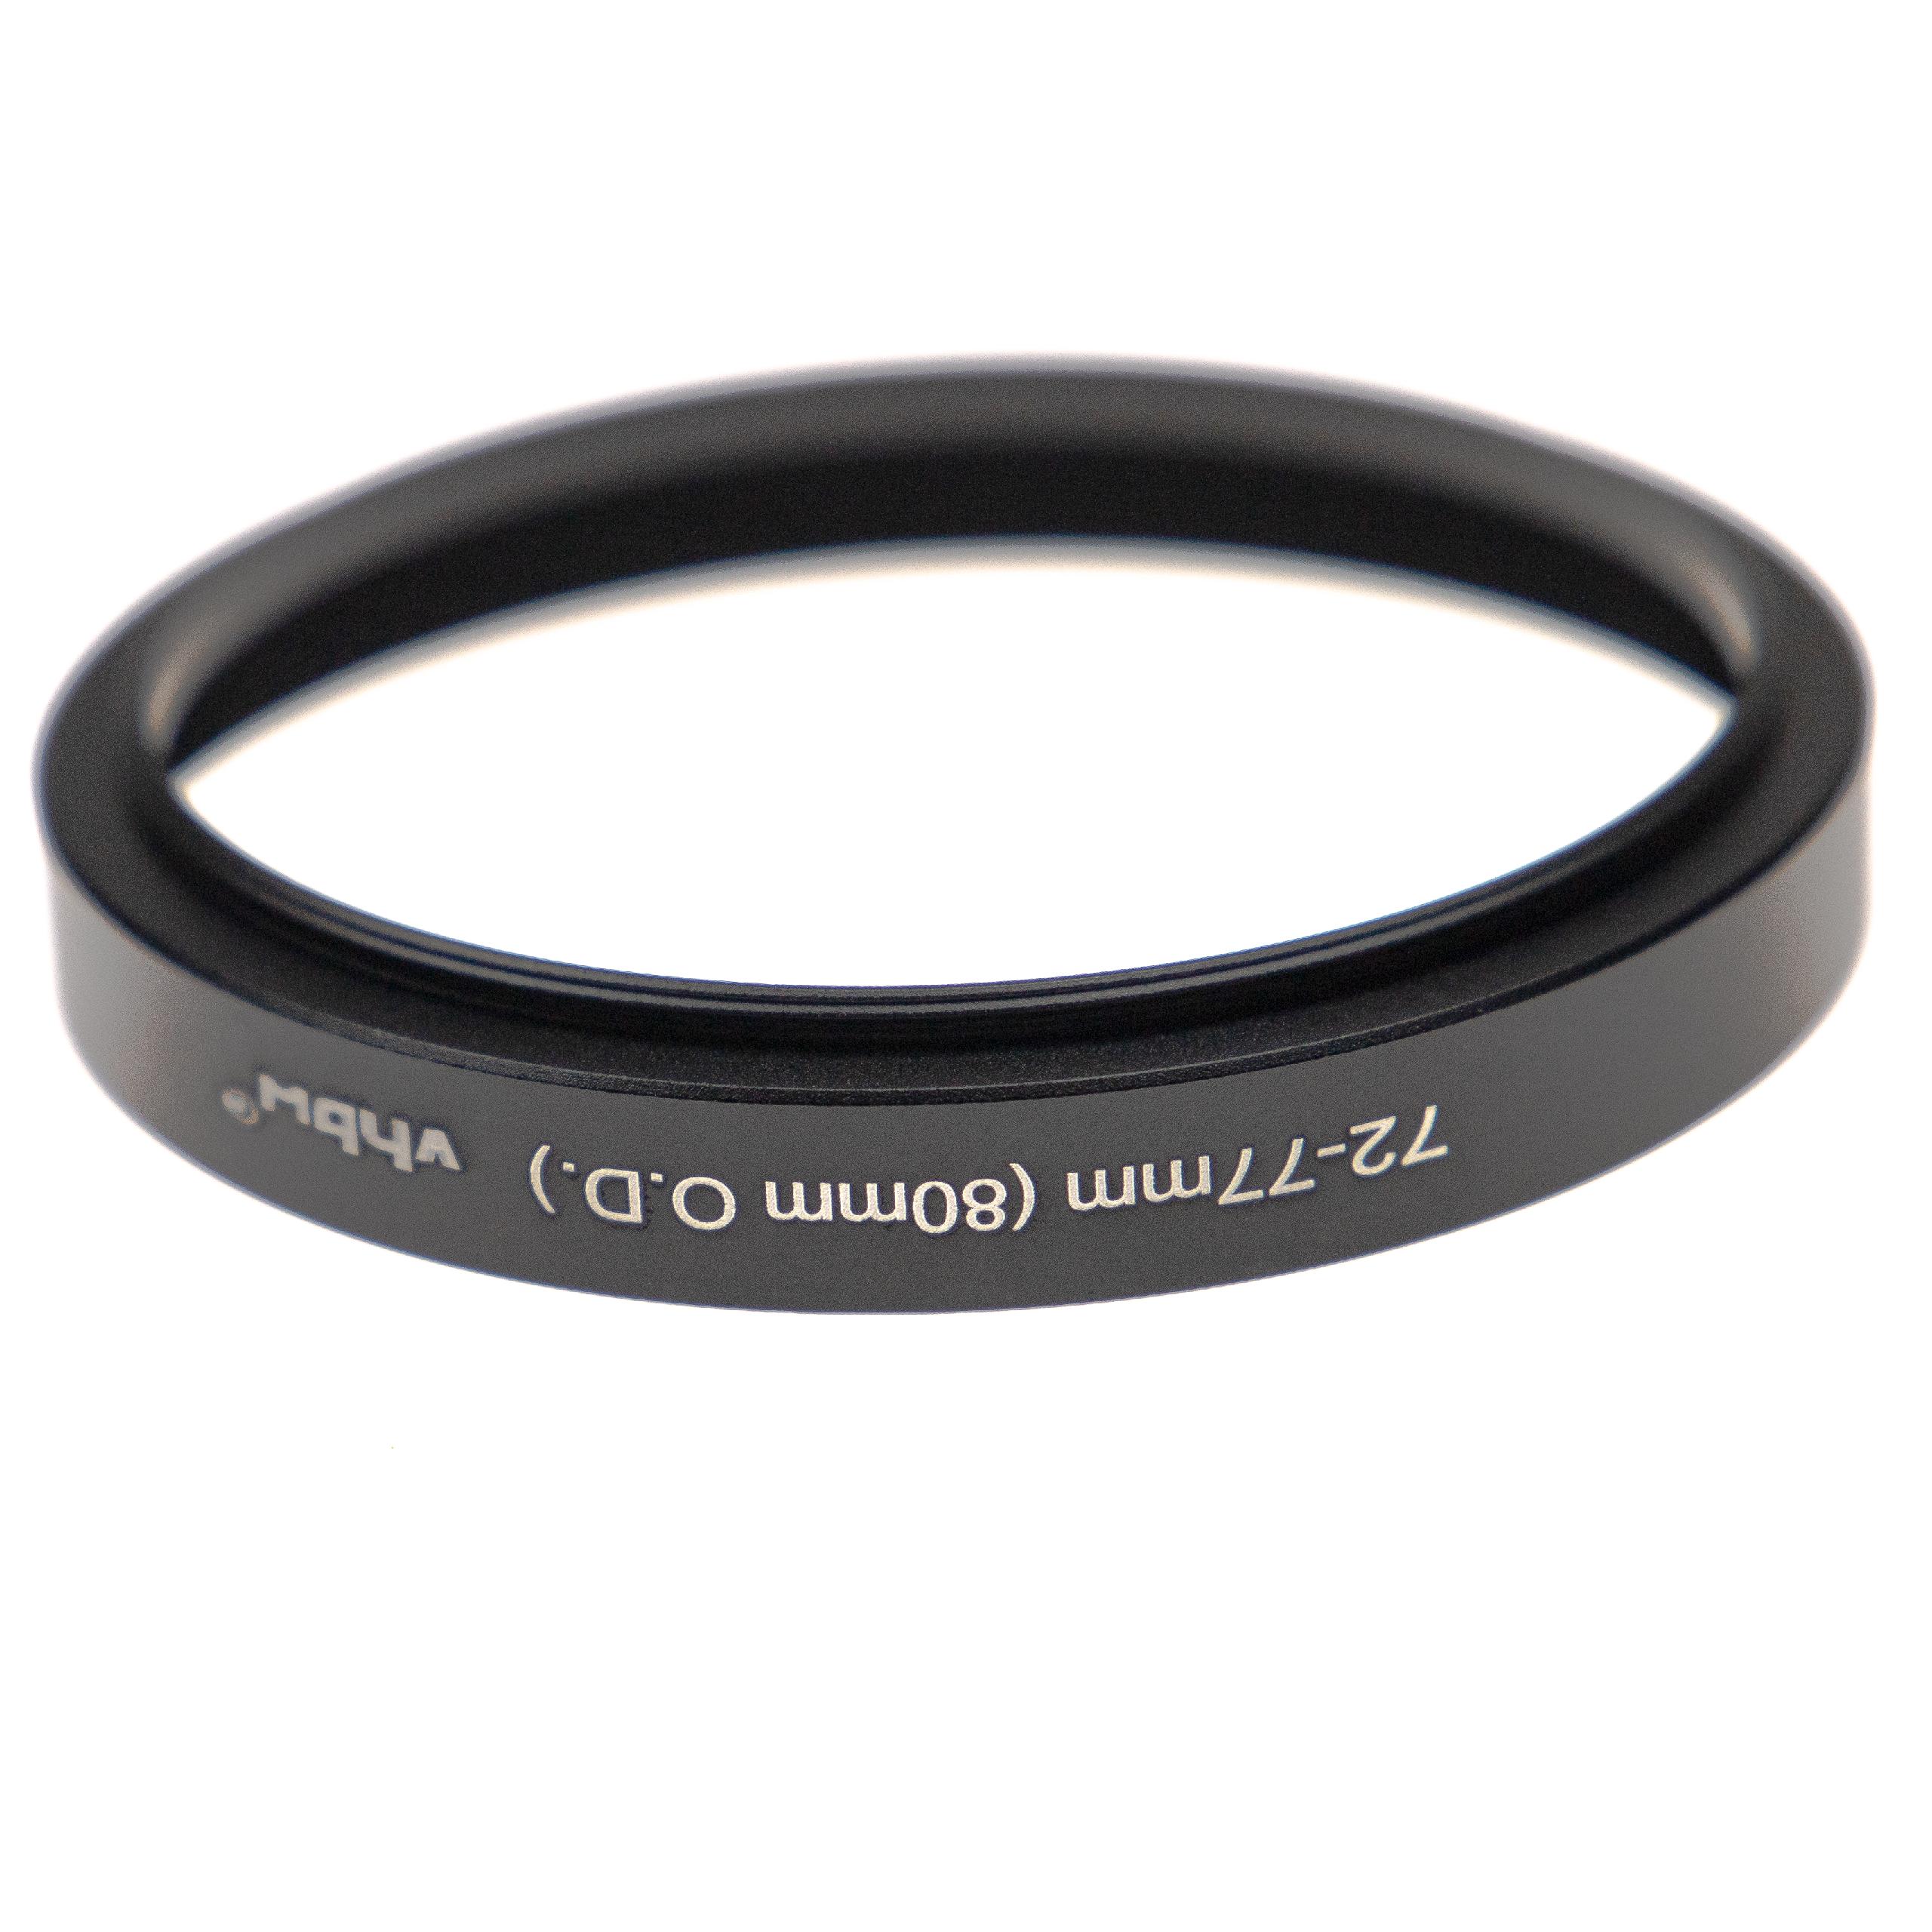 Step-Up Ring Adapter of 72 mm to 77 mm for matte box 80 mm O.D. - Filter Adapter